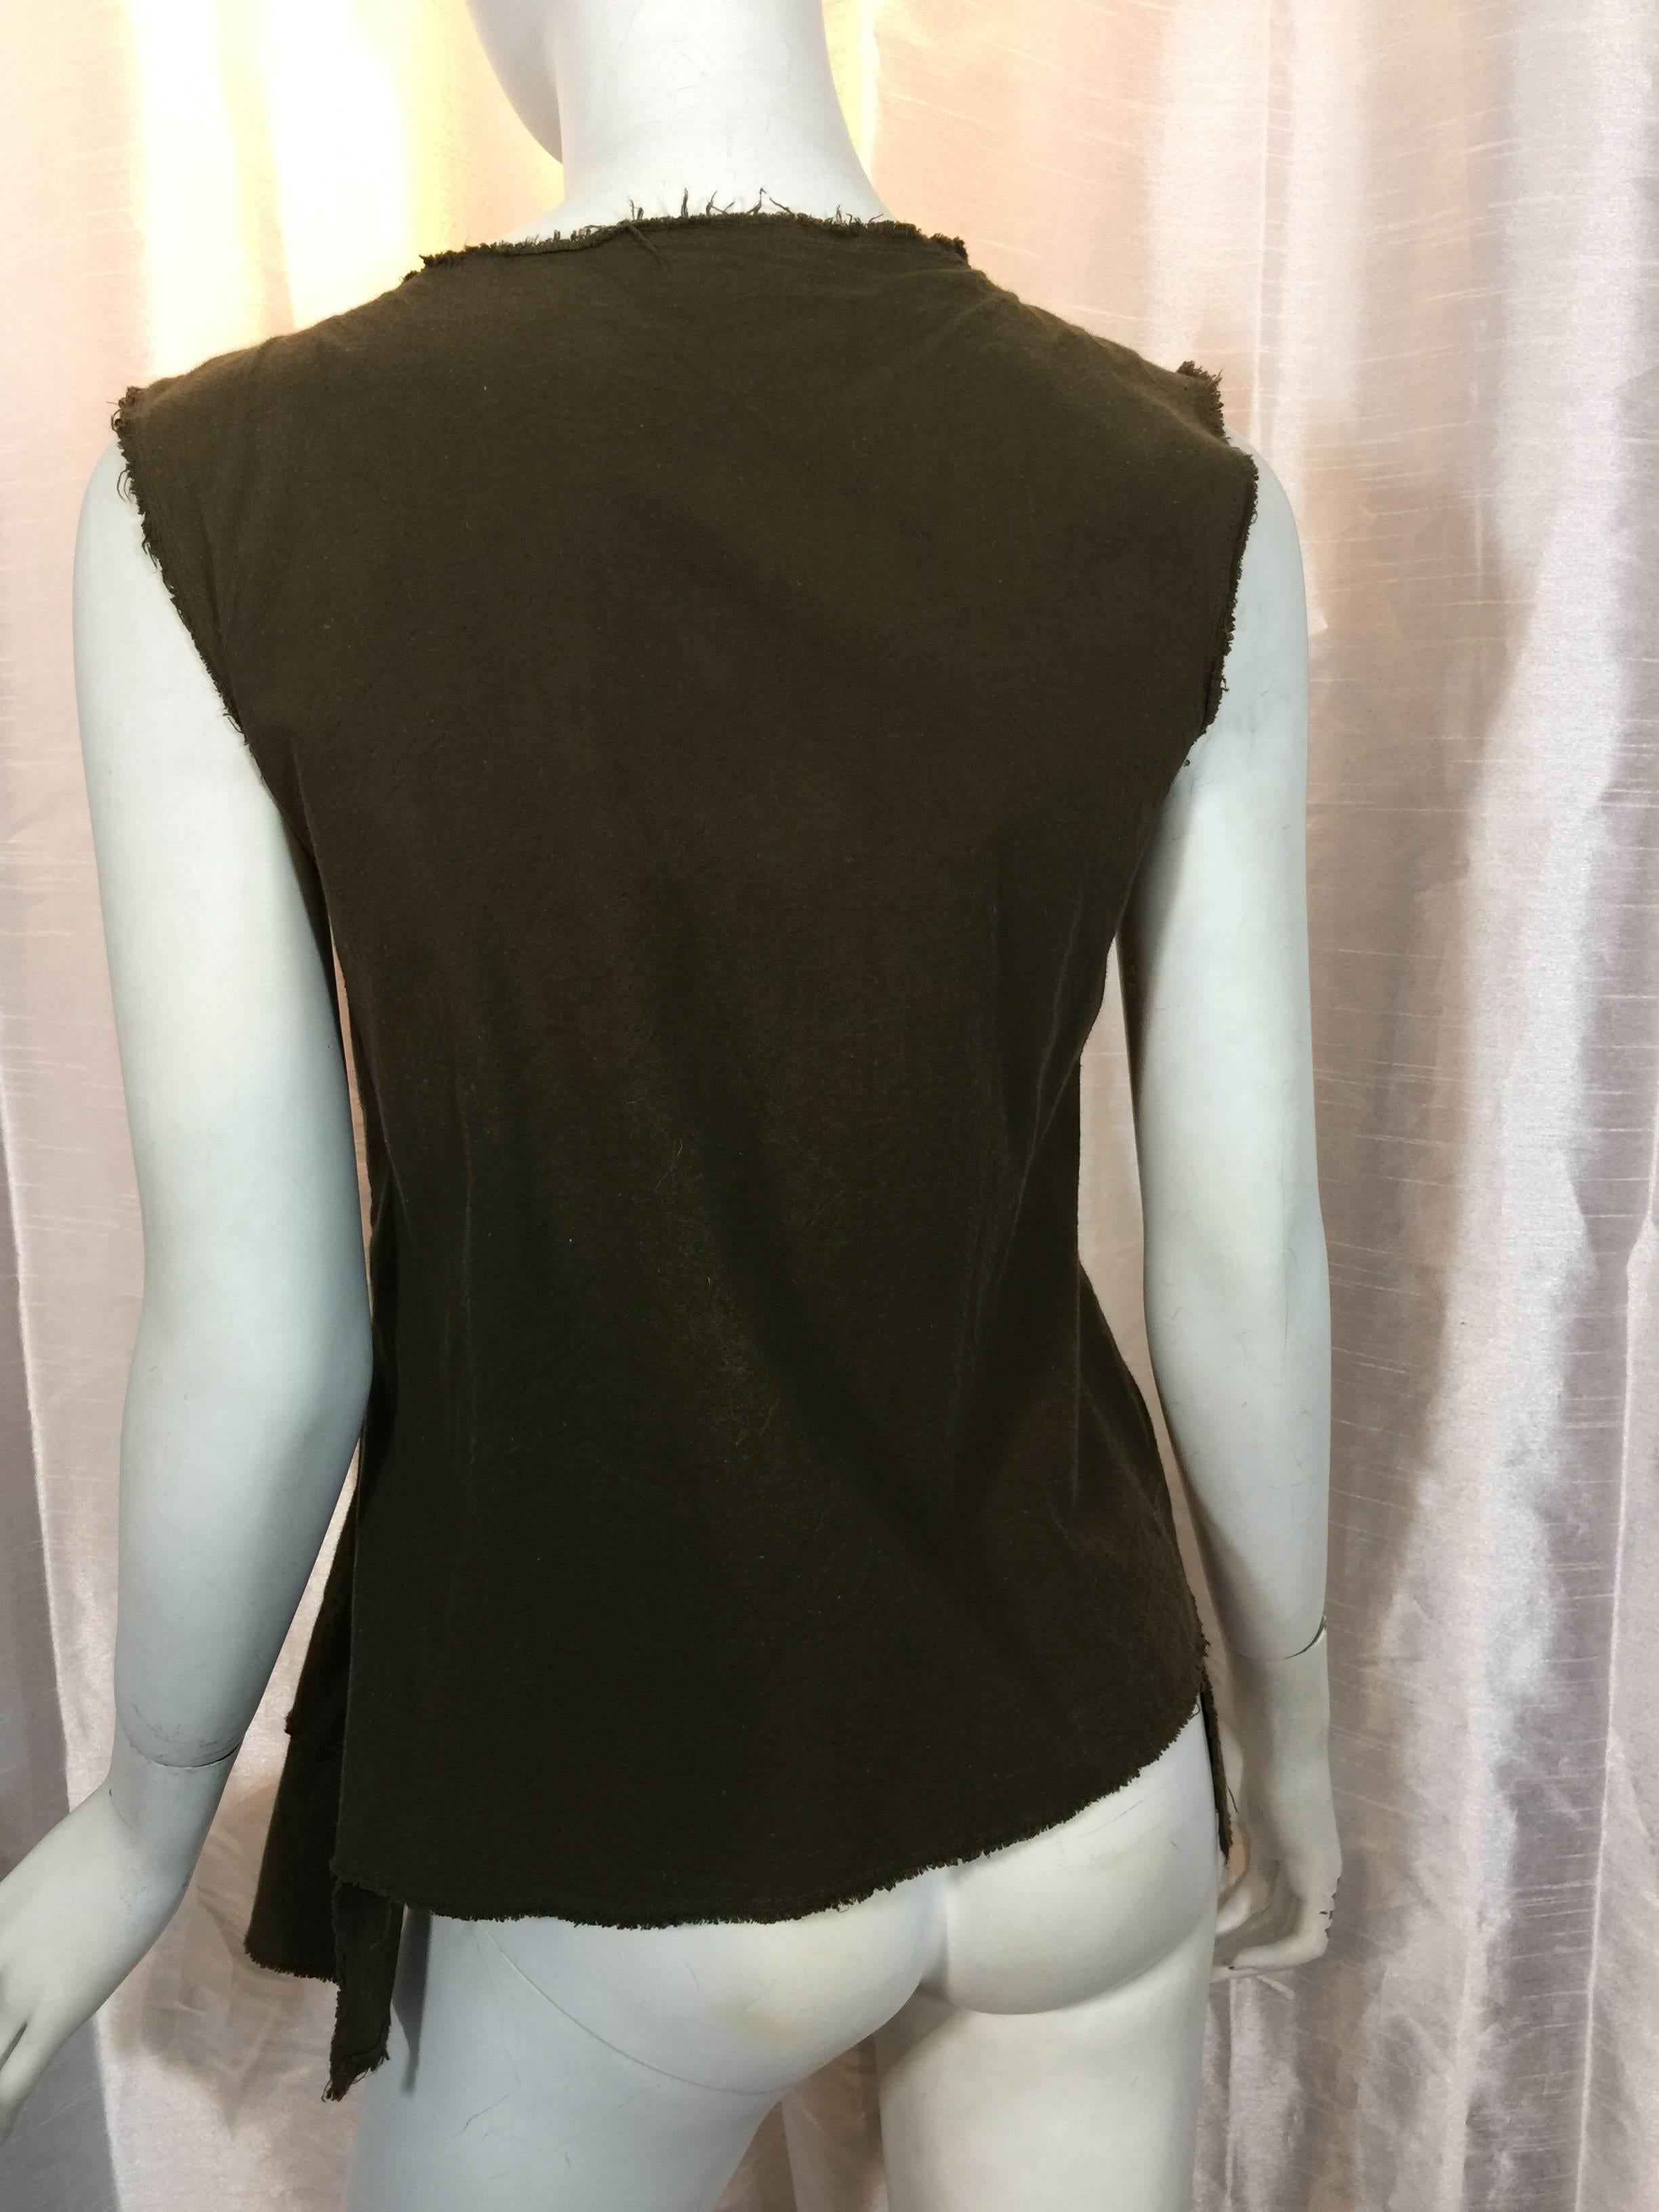 Comme des Garcons 2002 Rosette Vest and Braid Top In Excellent Condition For Sale In Carmel, CA